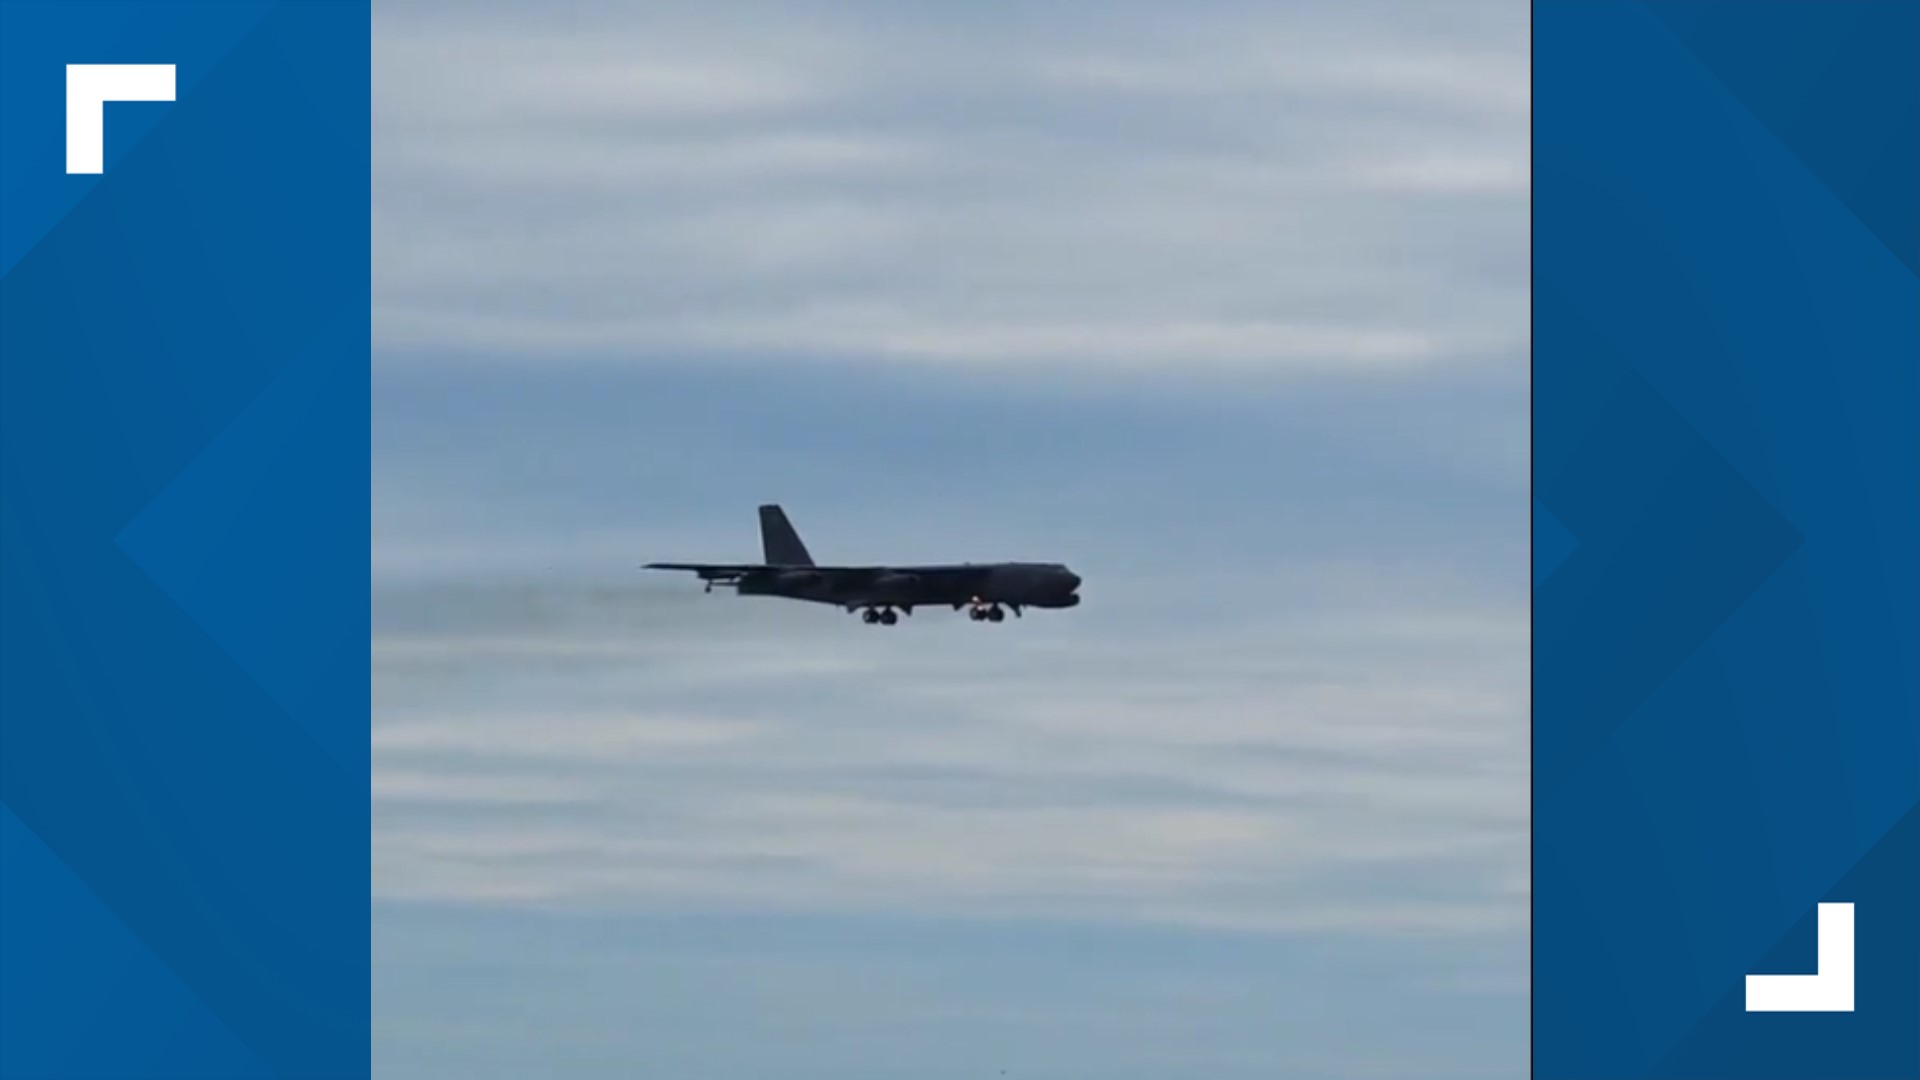 A B-52 bomber flew over Corpus Christi as part of Pilot for a Day on Tuesday.